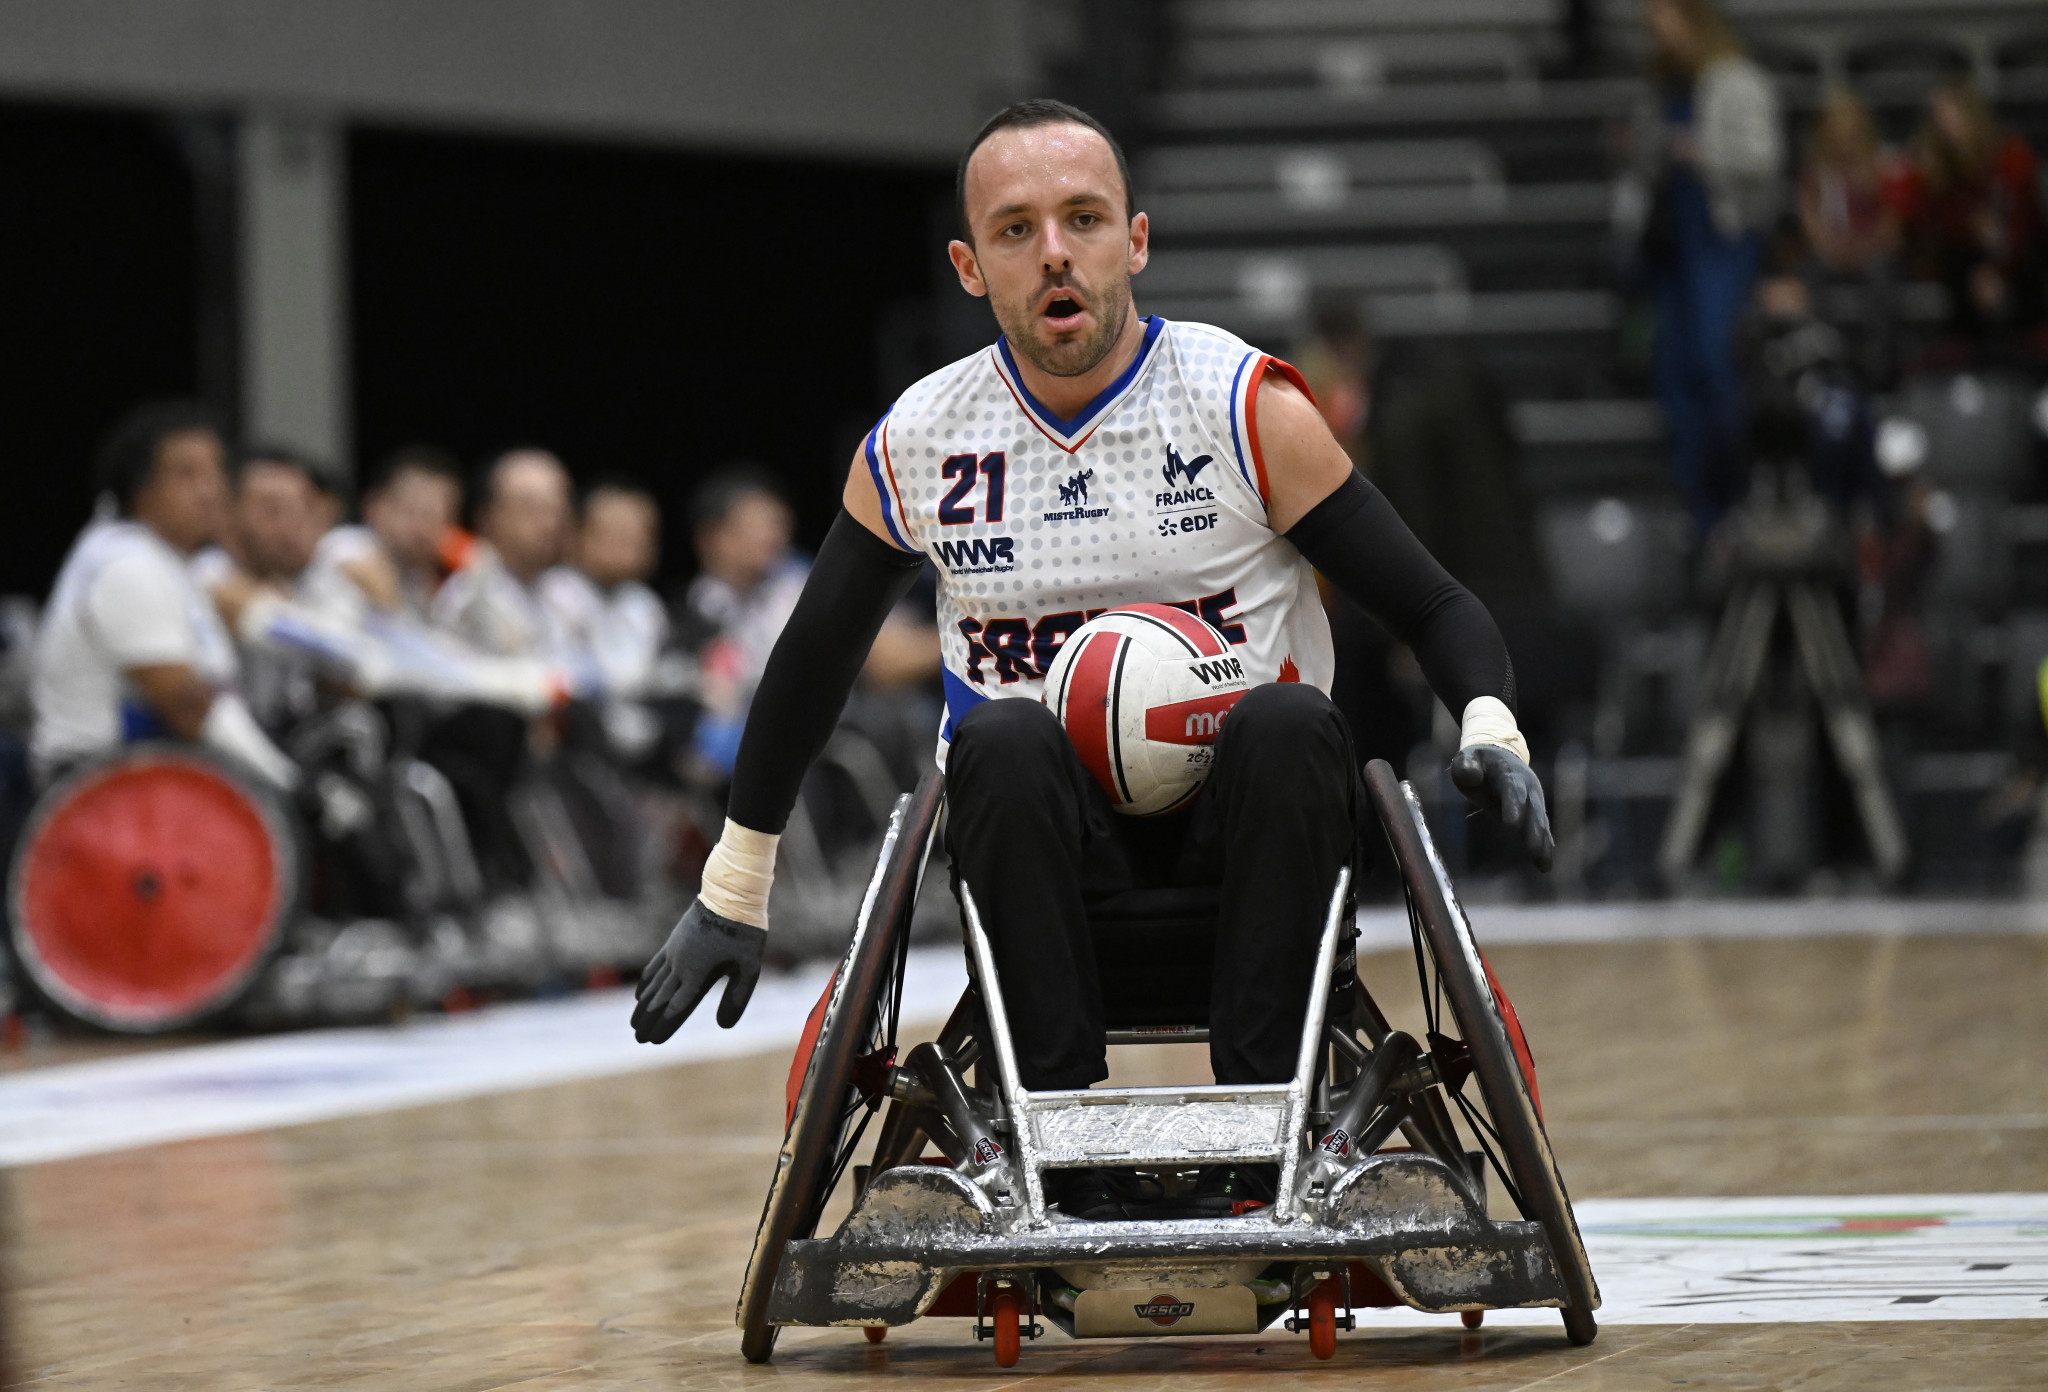 France disappointed in the knockout rounds following a stellar group phase performance ©Lars Møller/Parasport Denmark